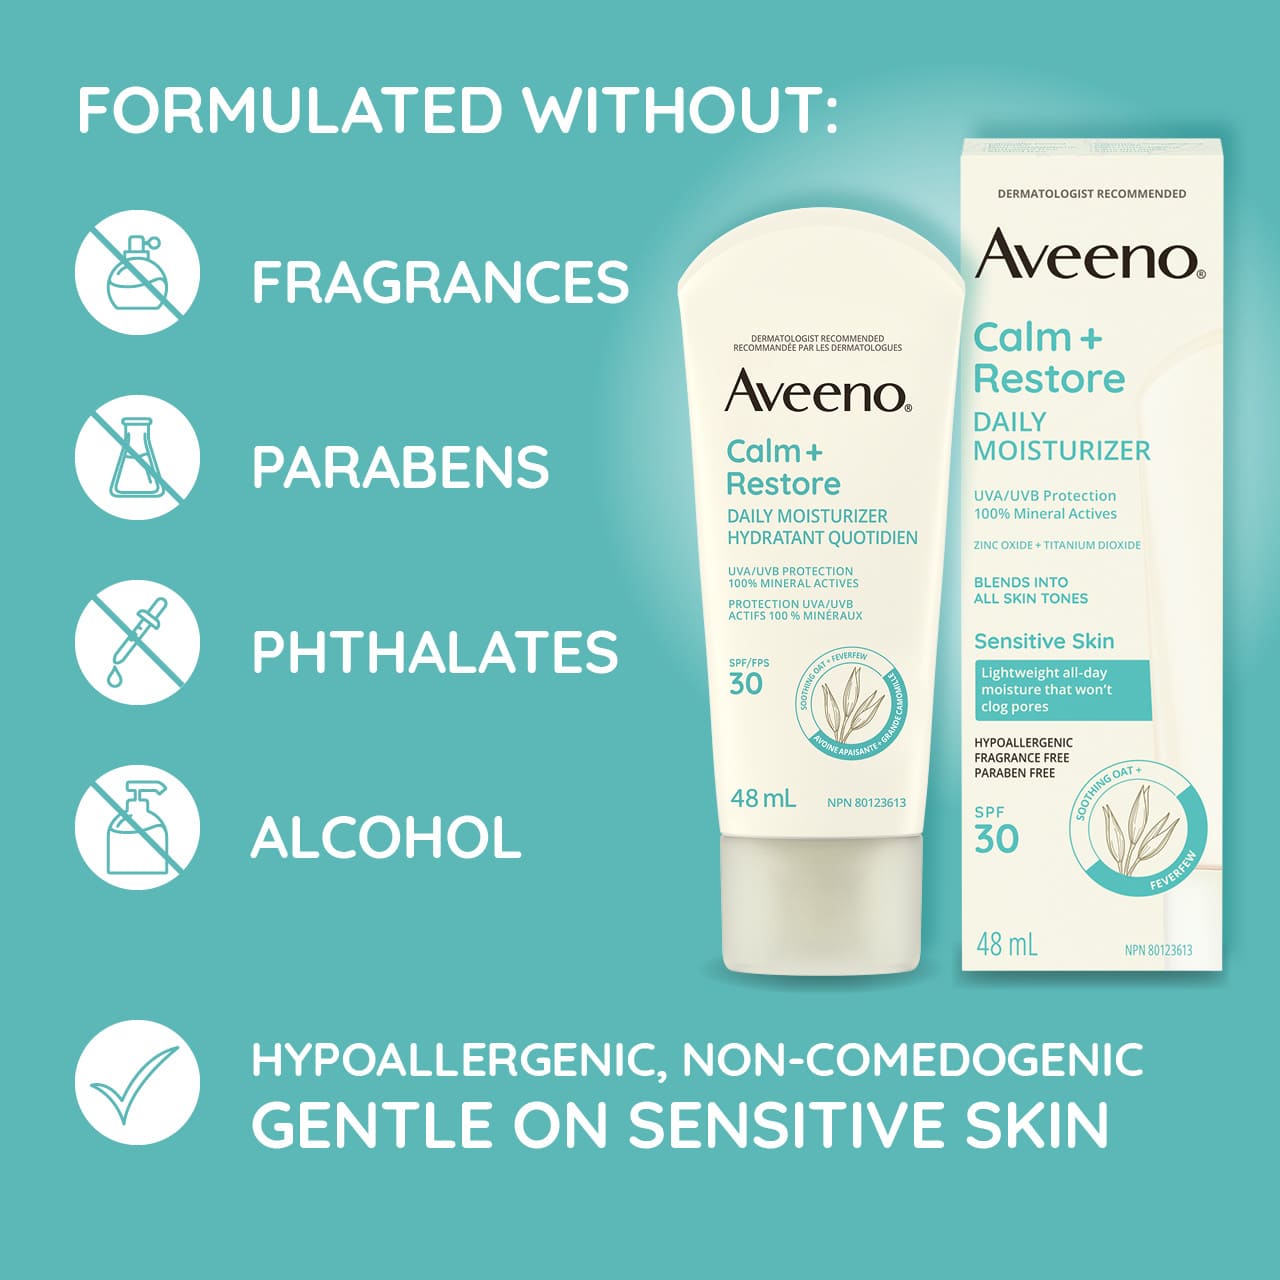 Aveeno® Calm + Restore Daily Moisturizer Mineral SPF 30, squeeze tube with its package and product formulation information